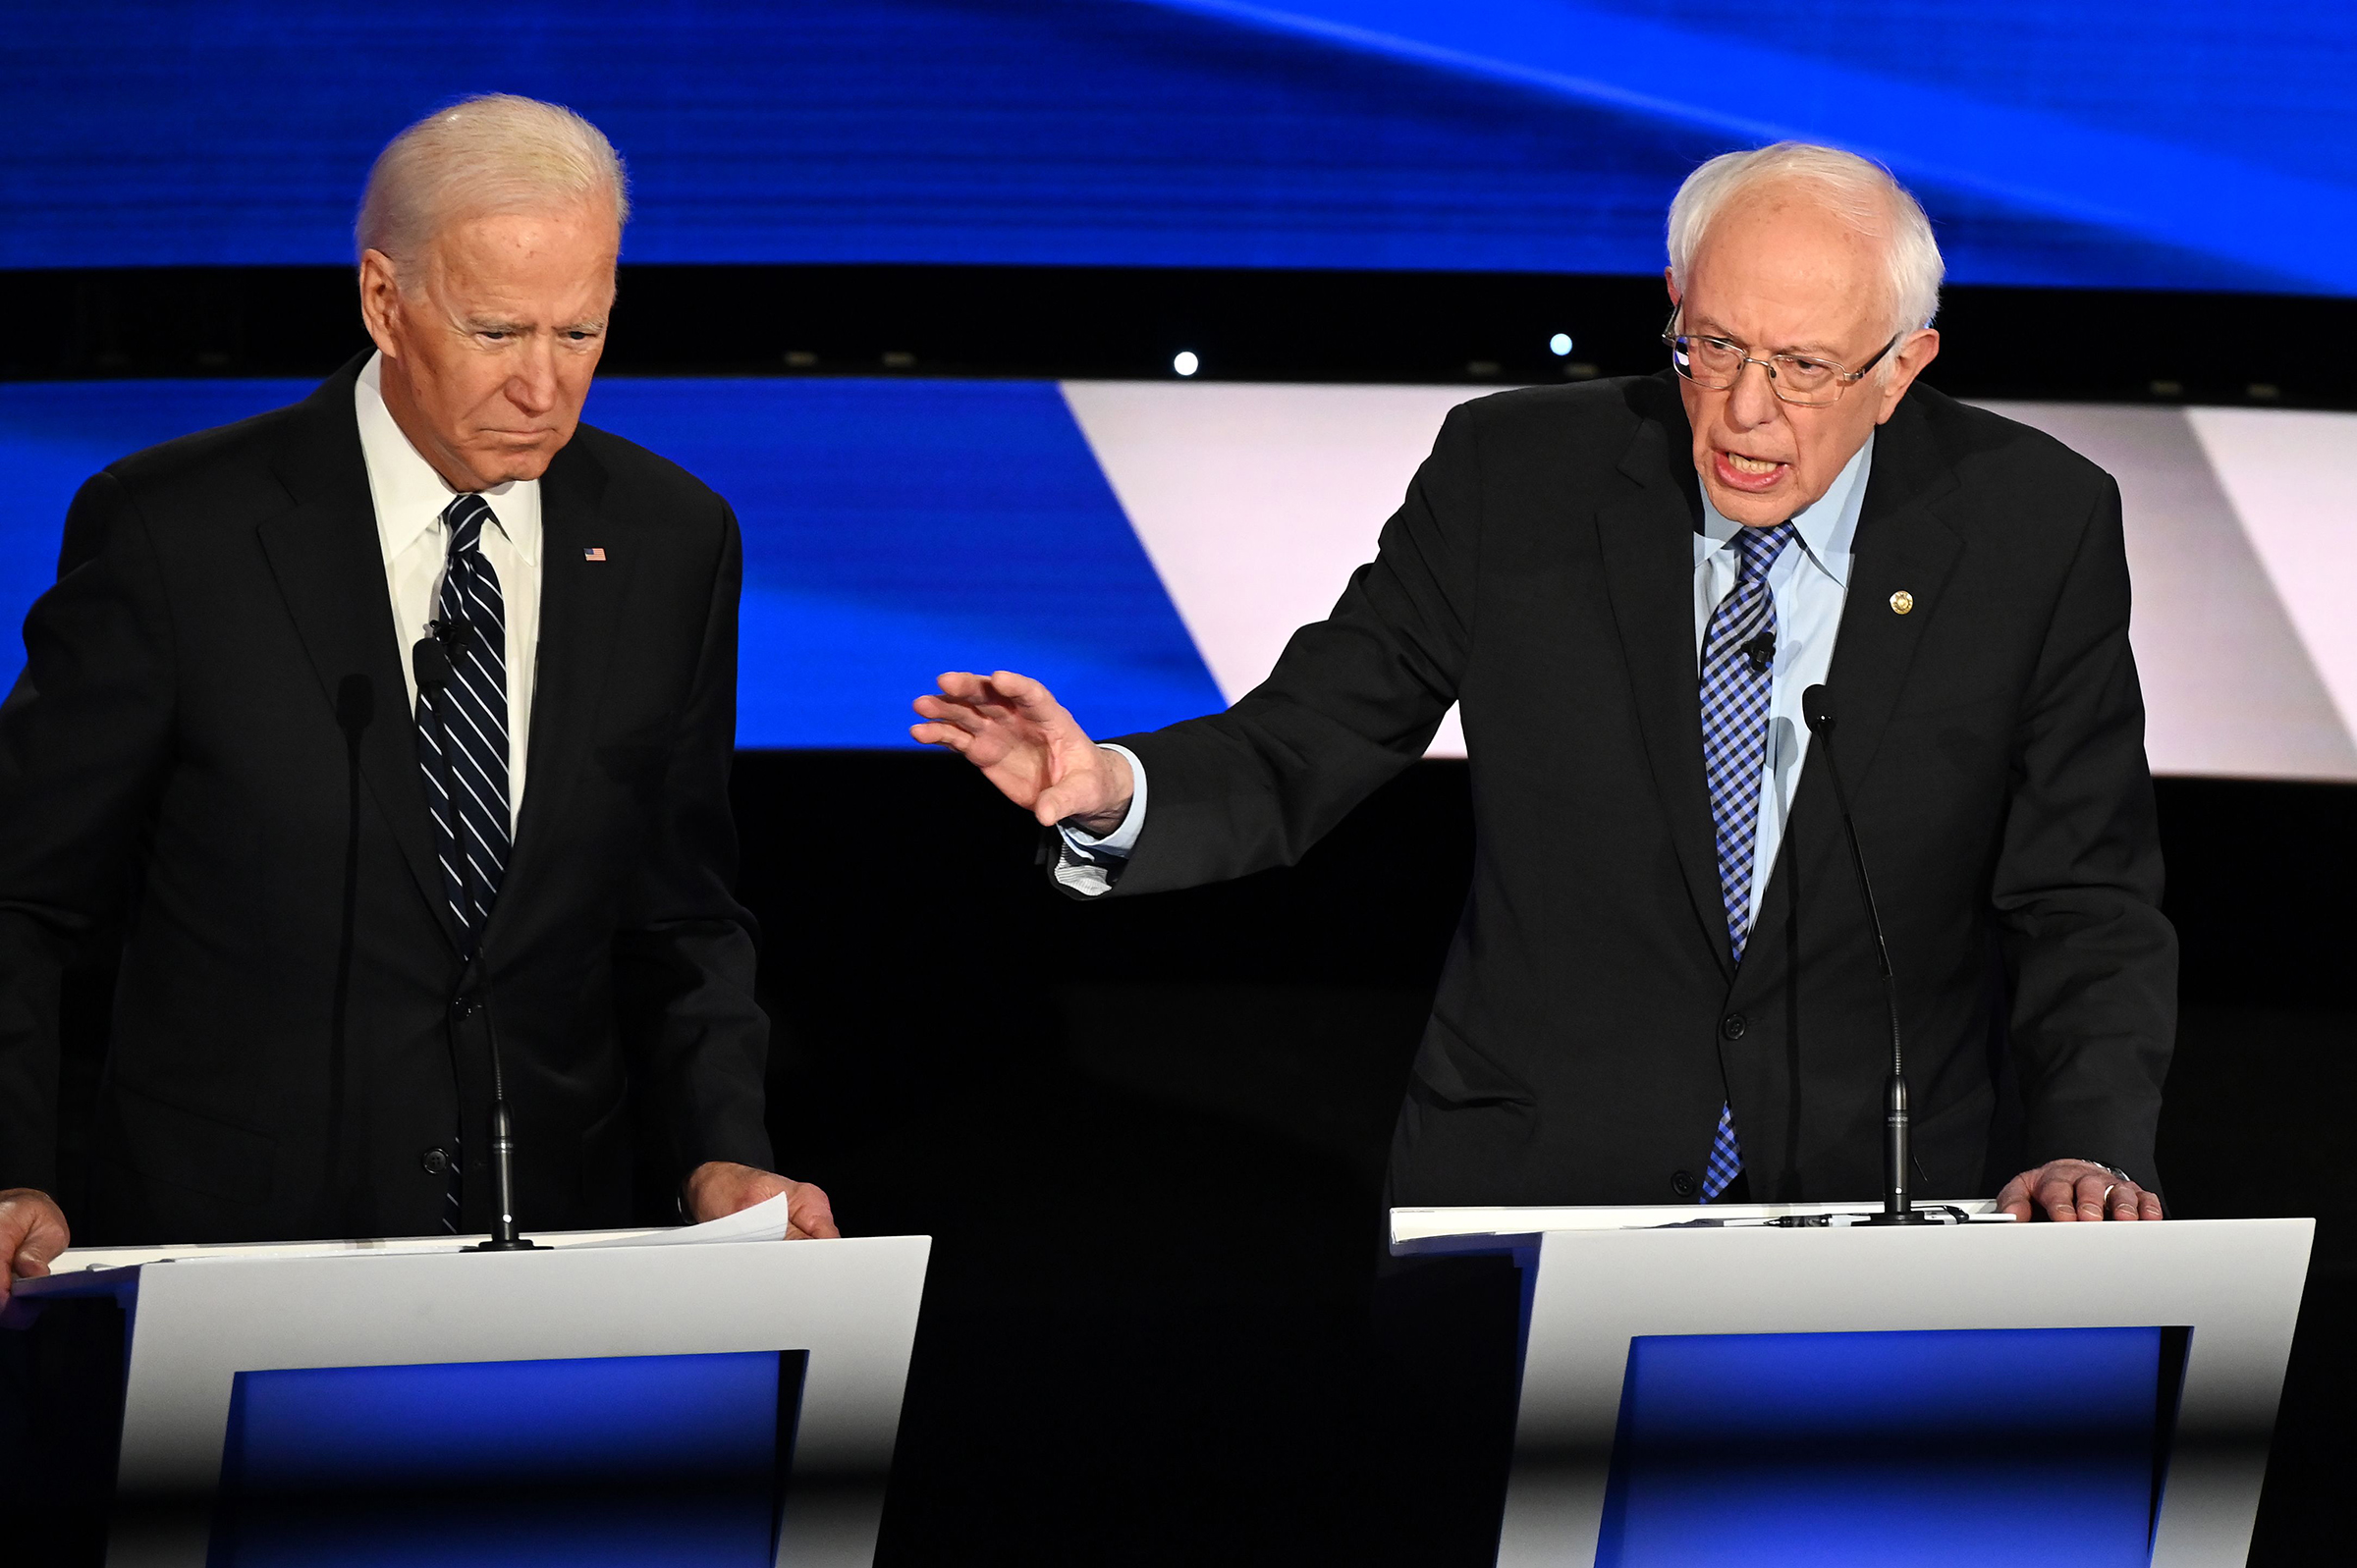 (L-R) Democratic presidential hopefuls Former Vice President Joe Biden (L) and Vermont Senator Bernie Sanders participate in the seventh Democratic primary debate of the 2020 presidential campaign in Des Moines, Iowa on Jan. 14, 2020. (Robyn Beck—AFP via Getty Images)